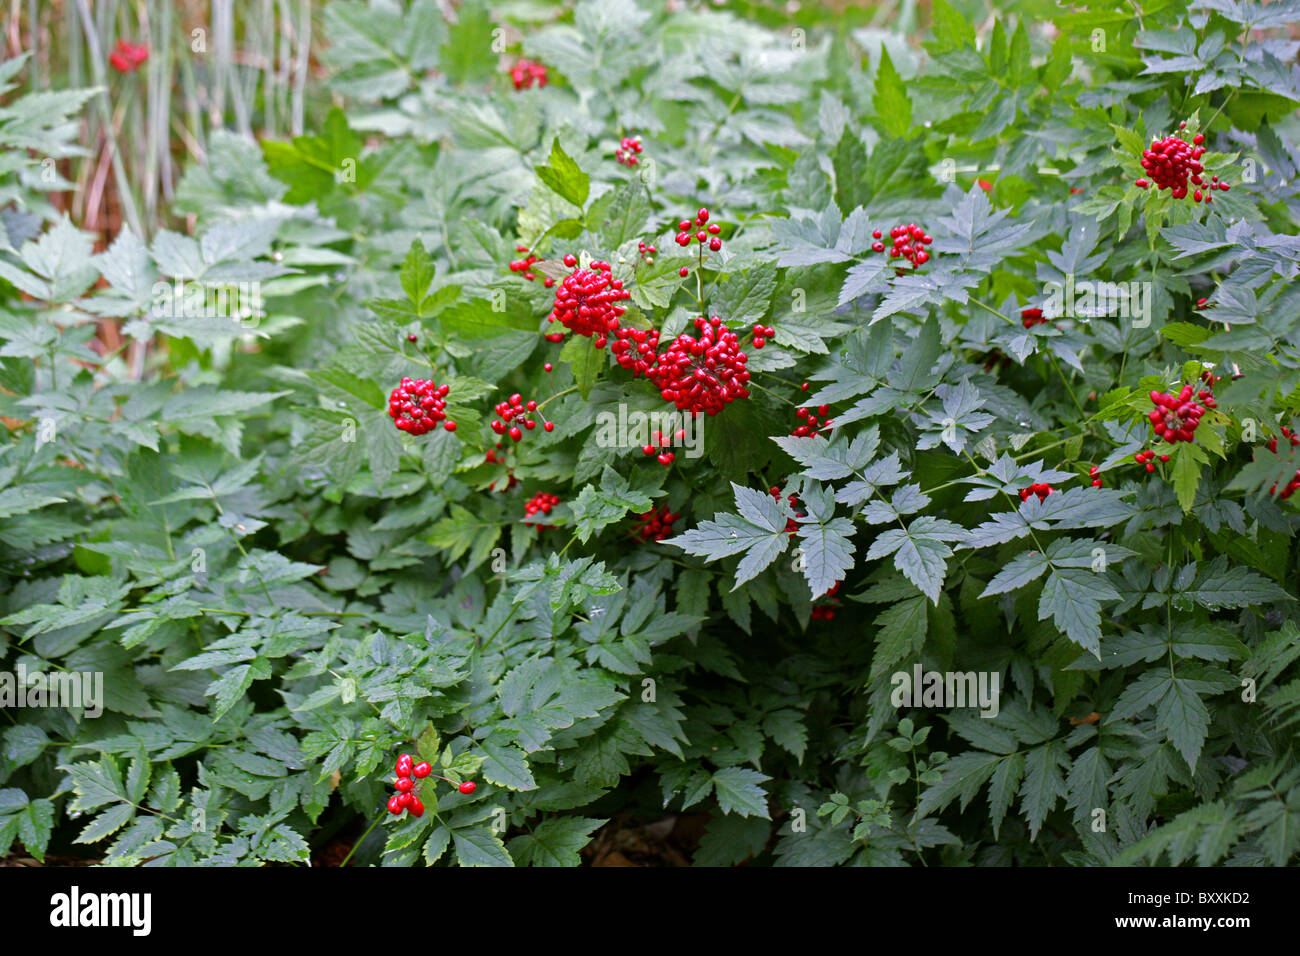 Red Baneberry, Chinaberry or Doll's Eye, Actaea rubra, Ranunculaceae. North America. Stock Photo